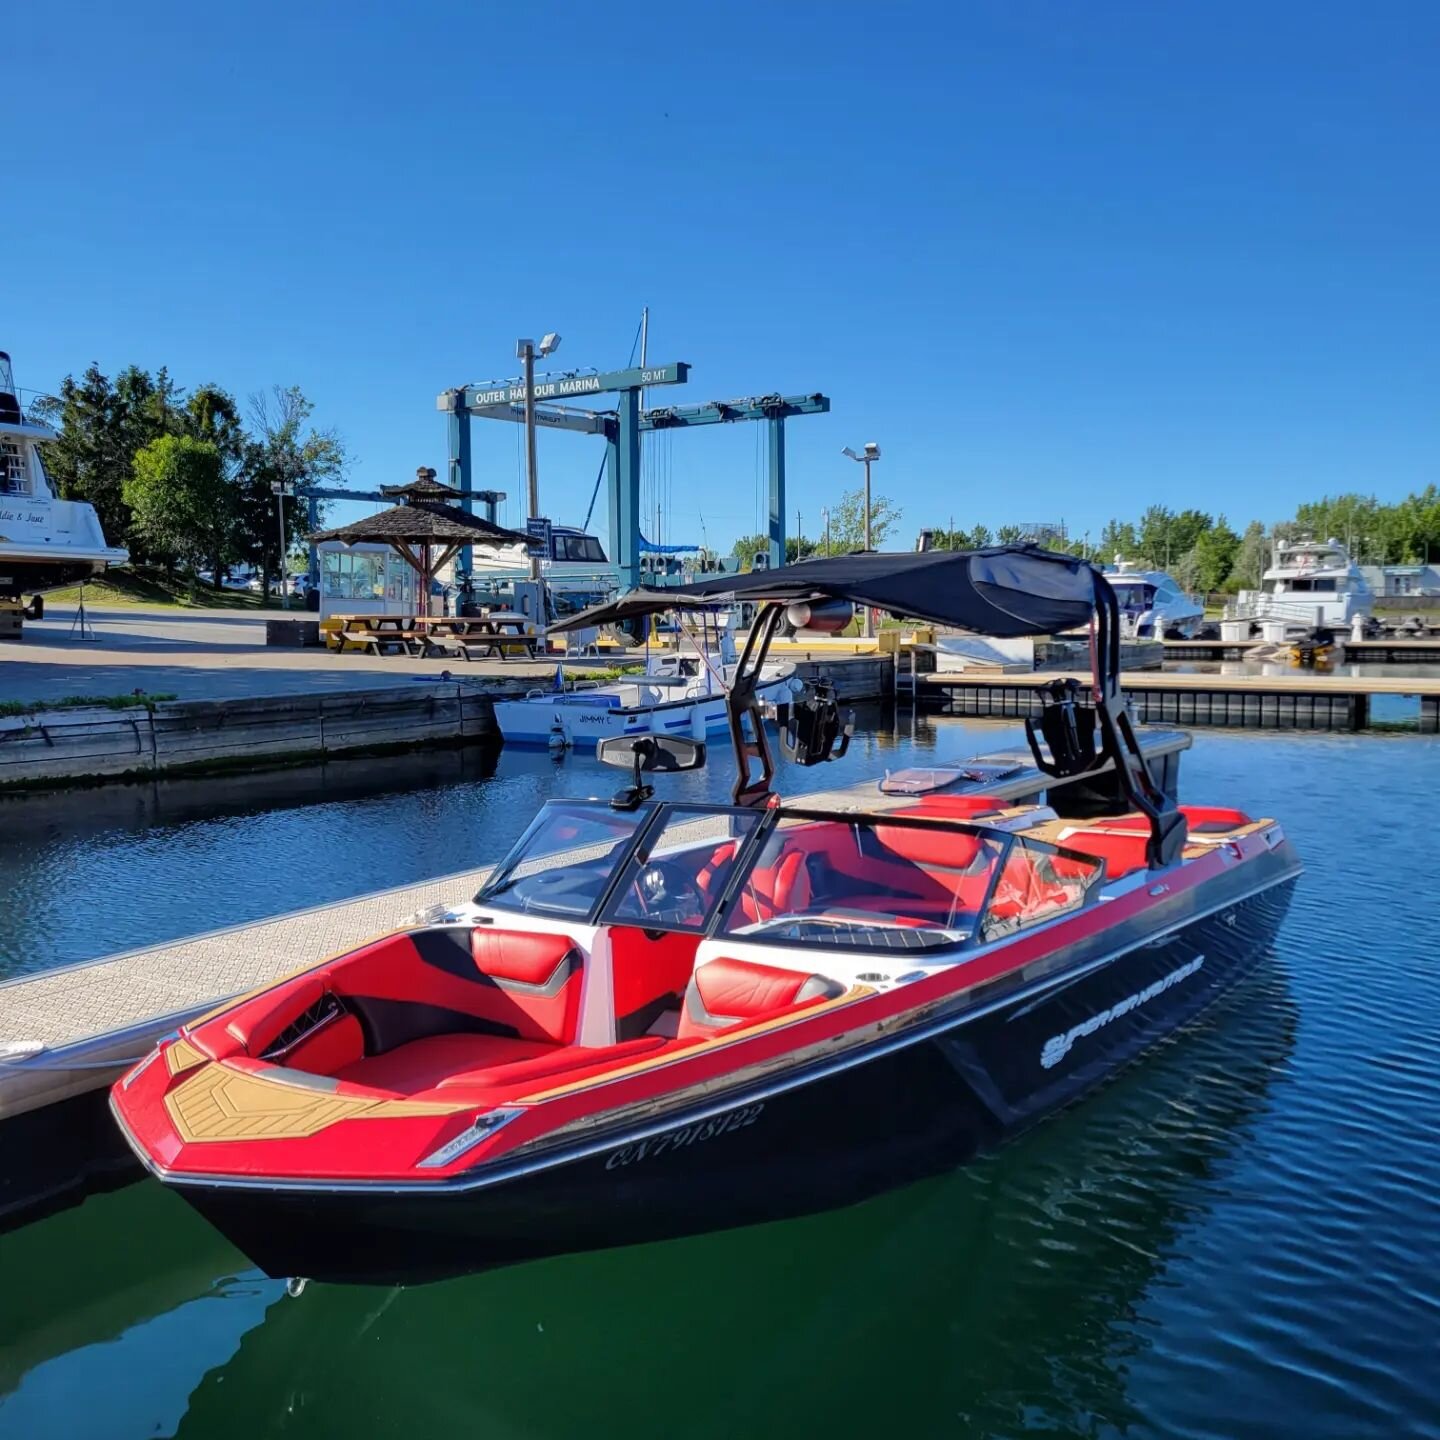 Rare red interior boat in the Marina. It was a pleasure detailing the  interior of this beautiful boat as well as assuring all the hard water marks were removed with our implacable polishing.